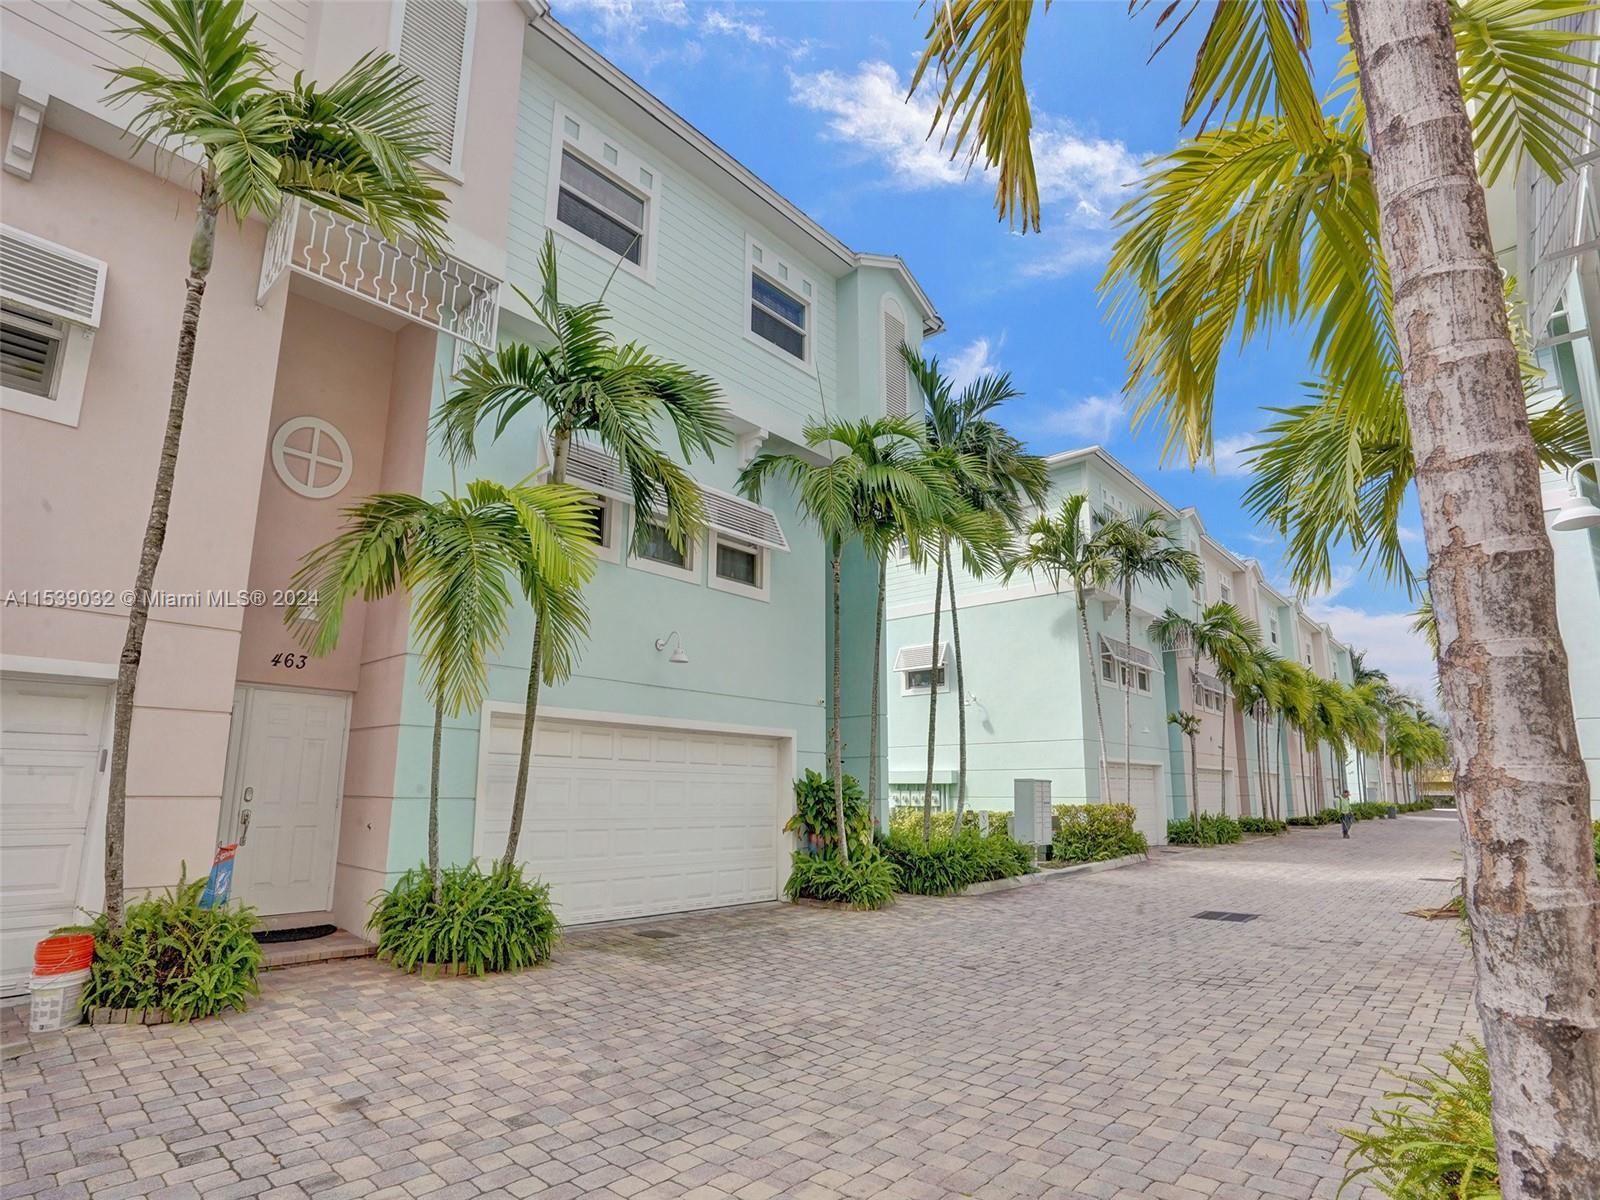 Discover unparalleled coastal living in Pompano, just a 7-minute drive from the beach. This exquisit